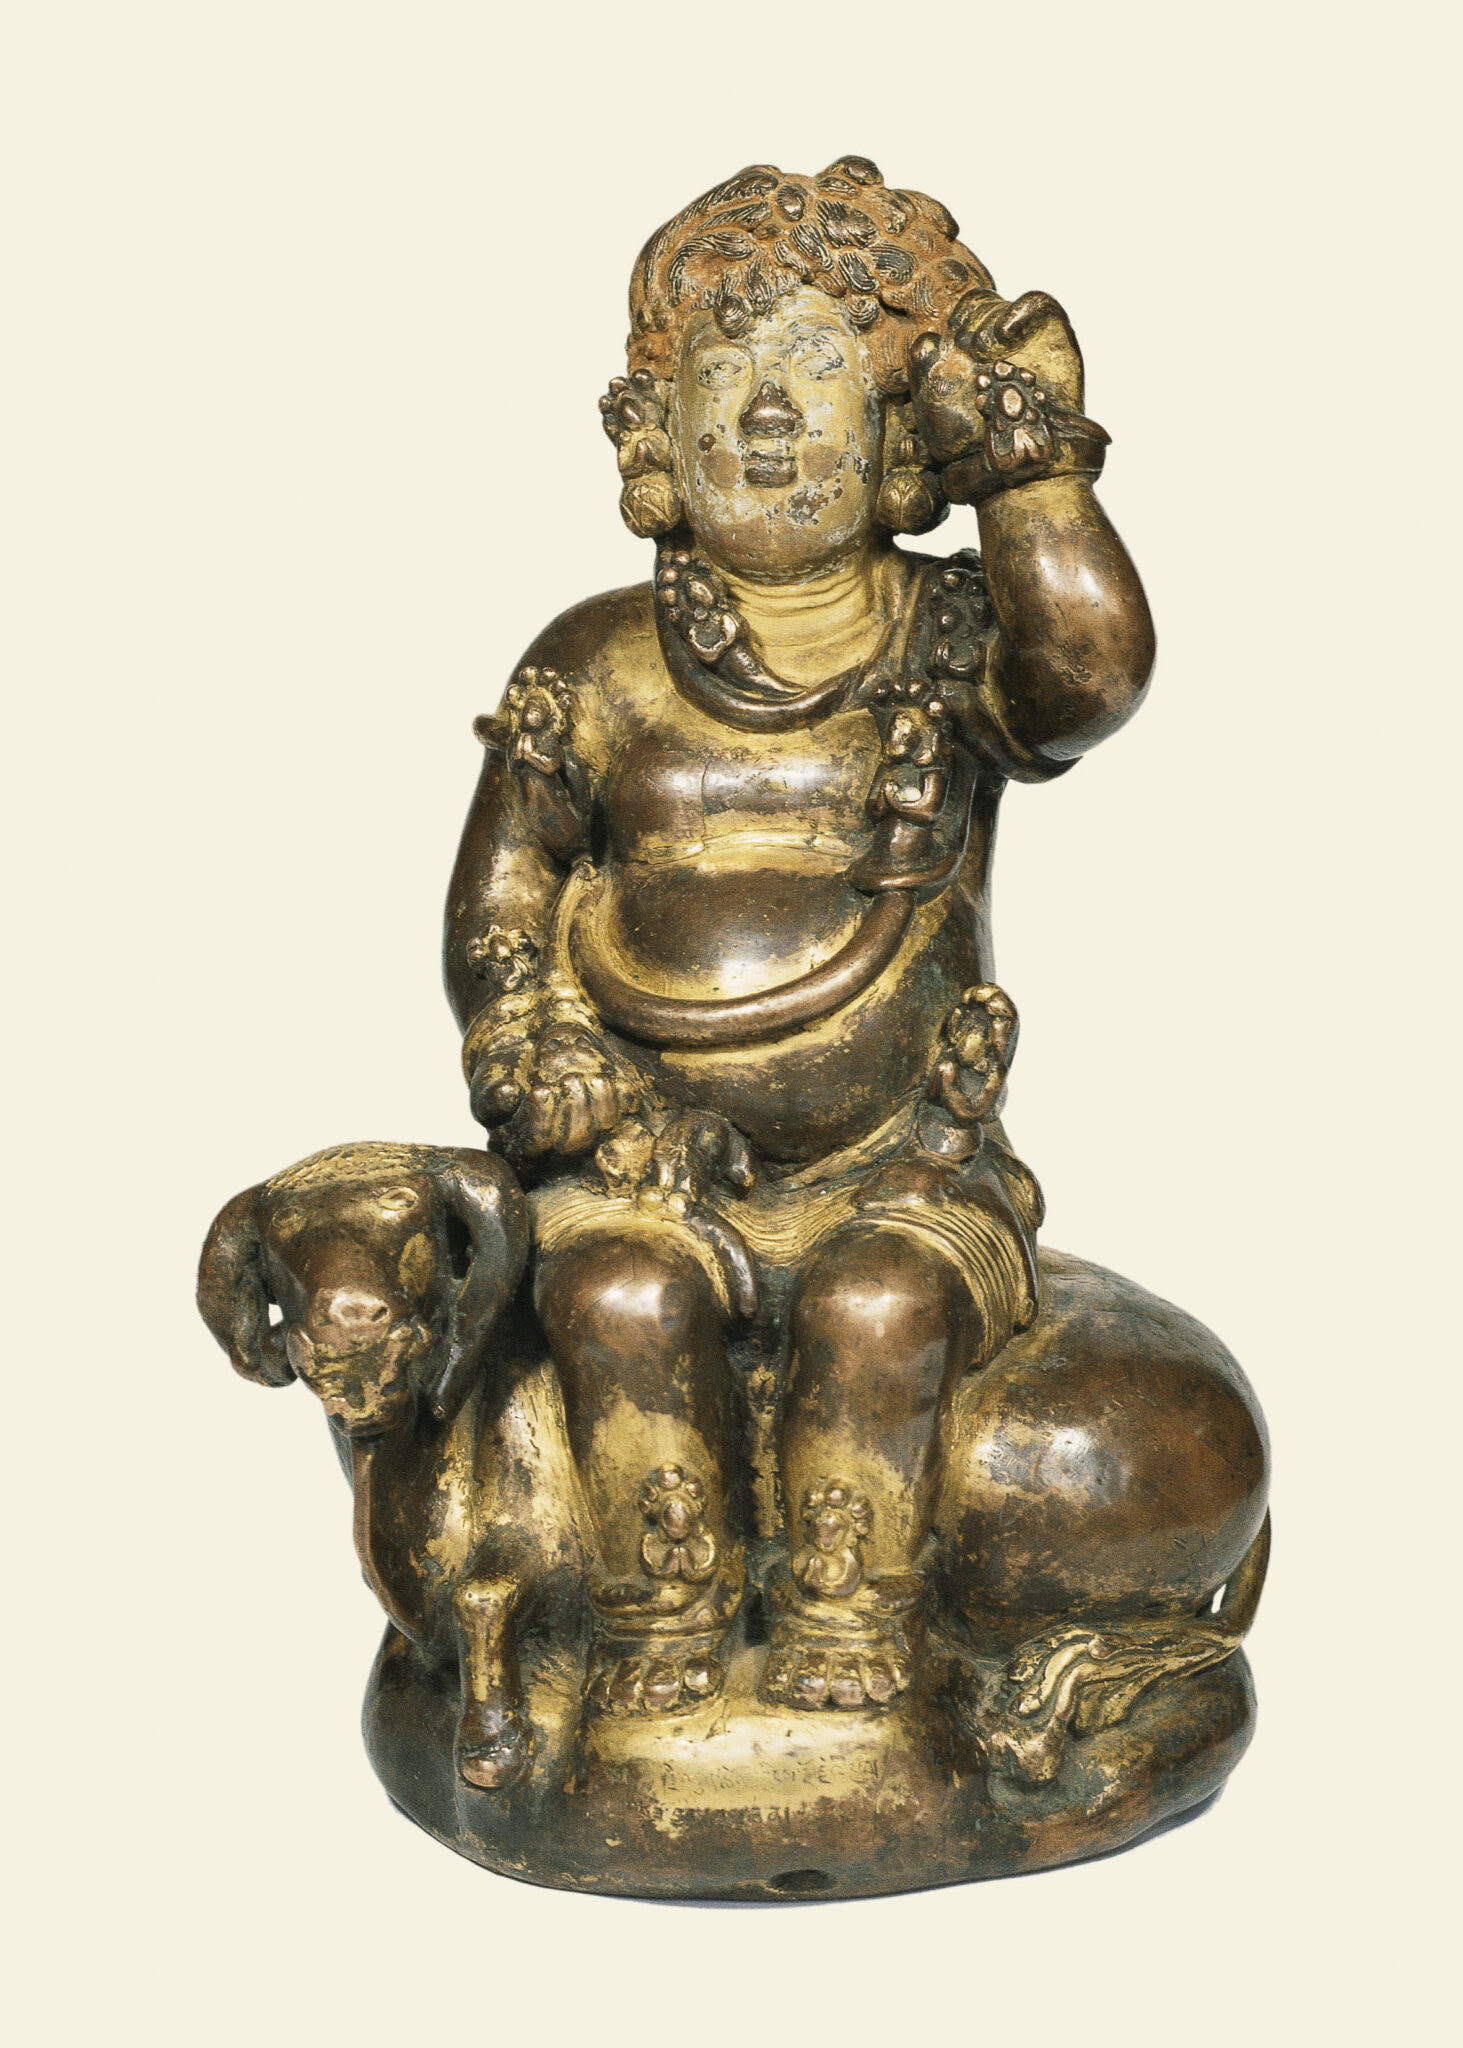 Copper and gold sculpture depicting deity with curly hair and protruding belly seated on horned cow